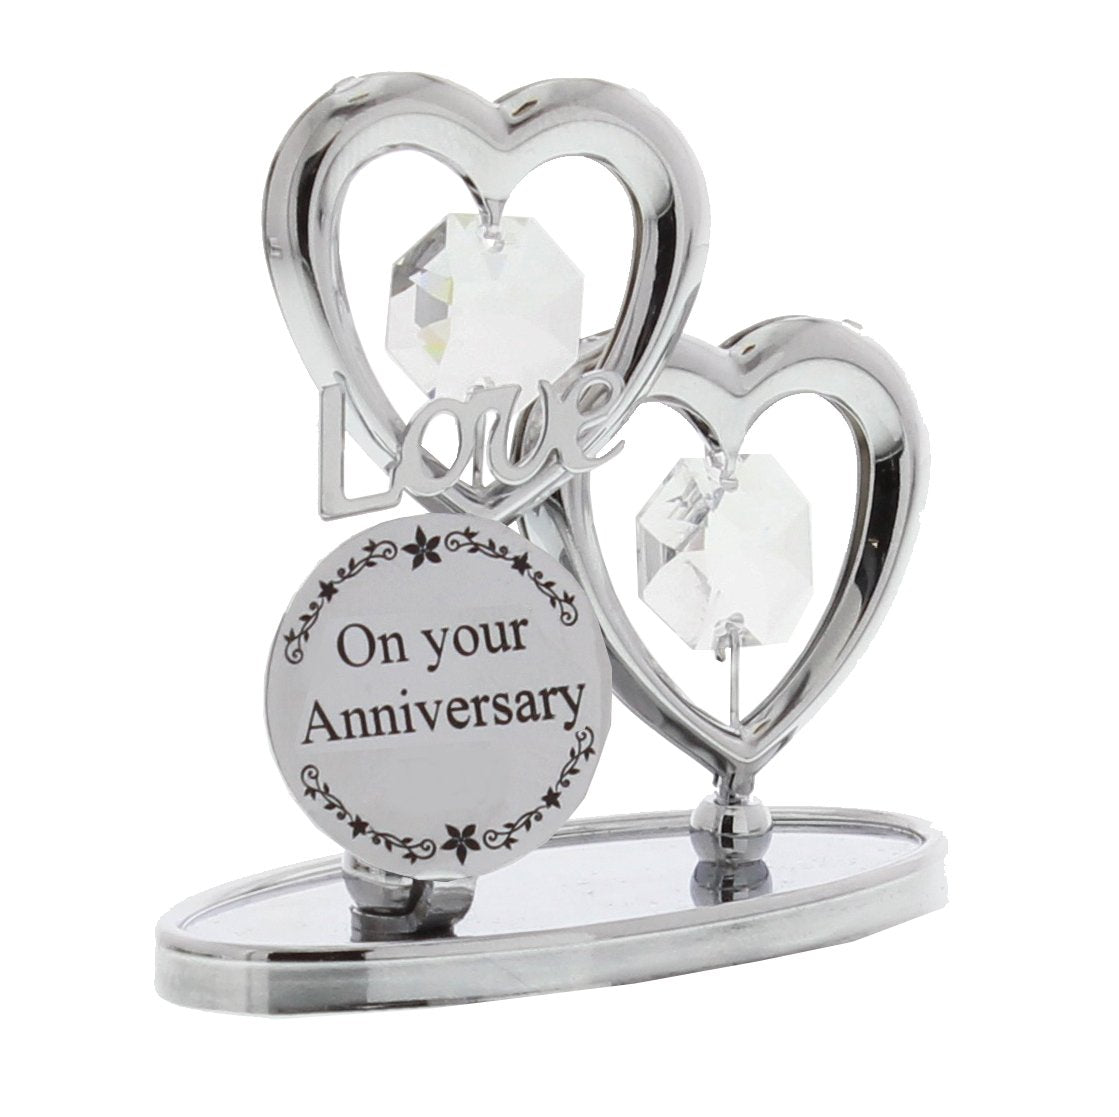 Crystocraft-Keepsake-Gift-Chrome-Plated-On-Your-Anniversary-Gift-Ornament-Love-Hearts-with-Swarvoski-Crystal-Elements